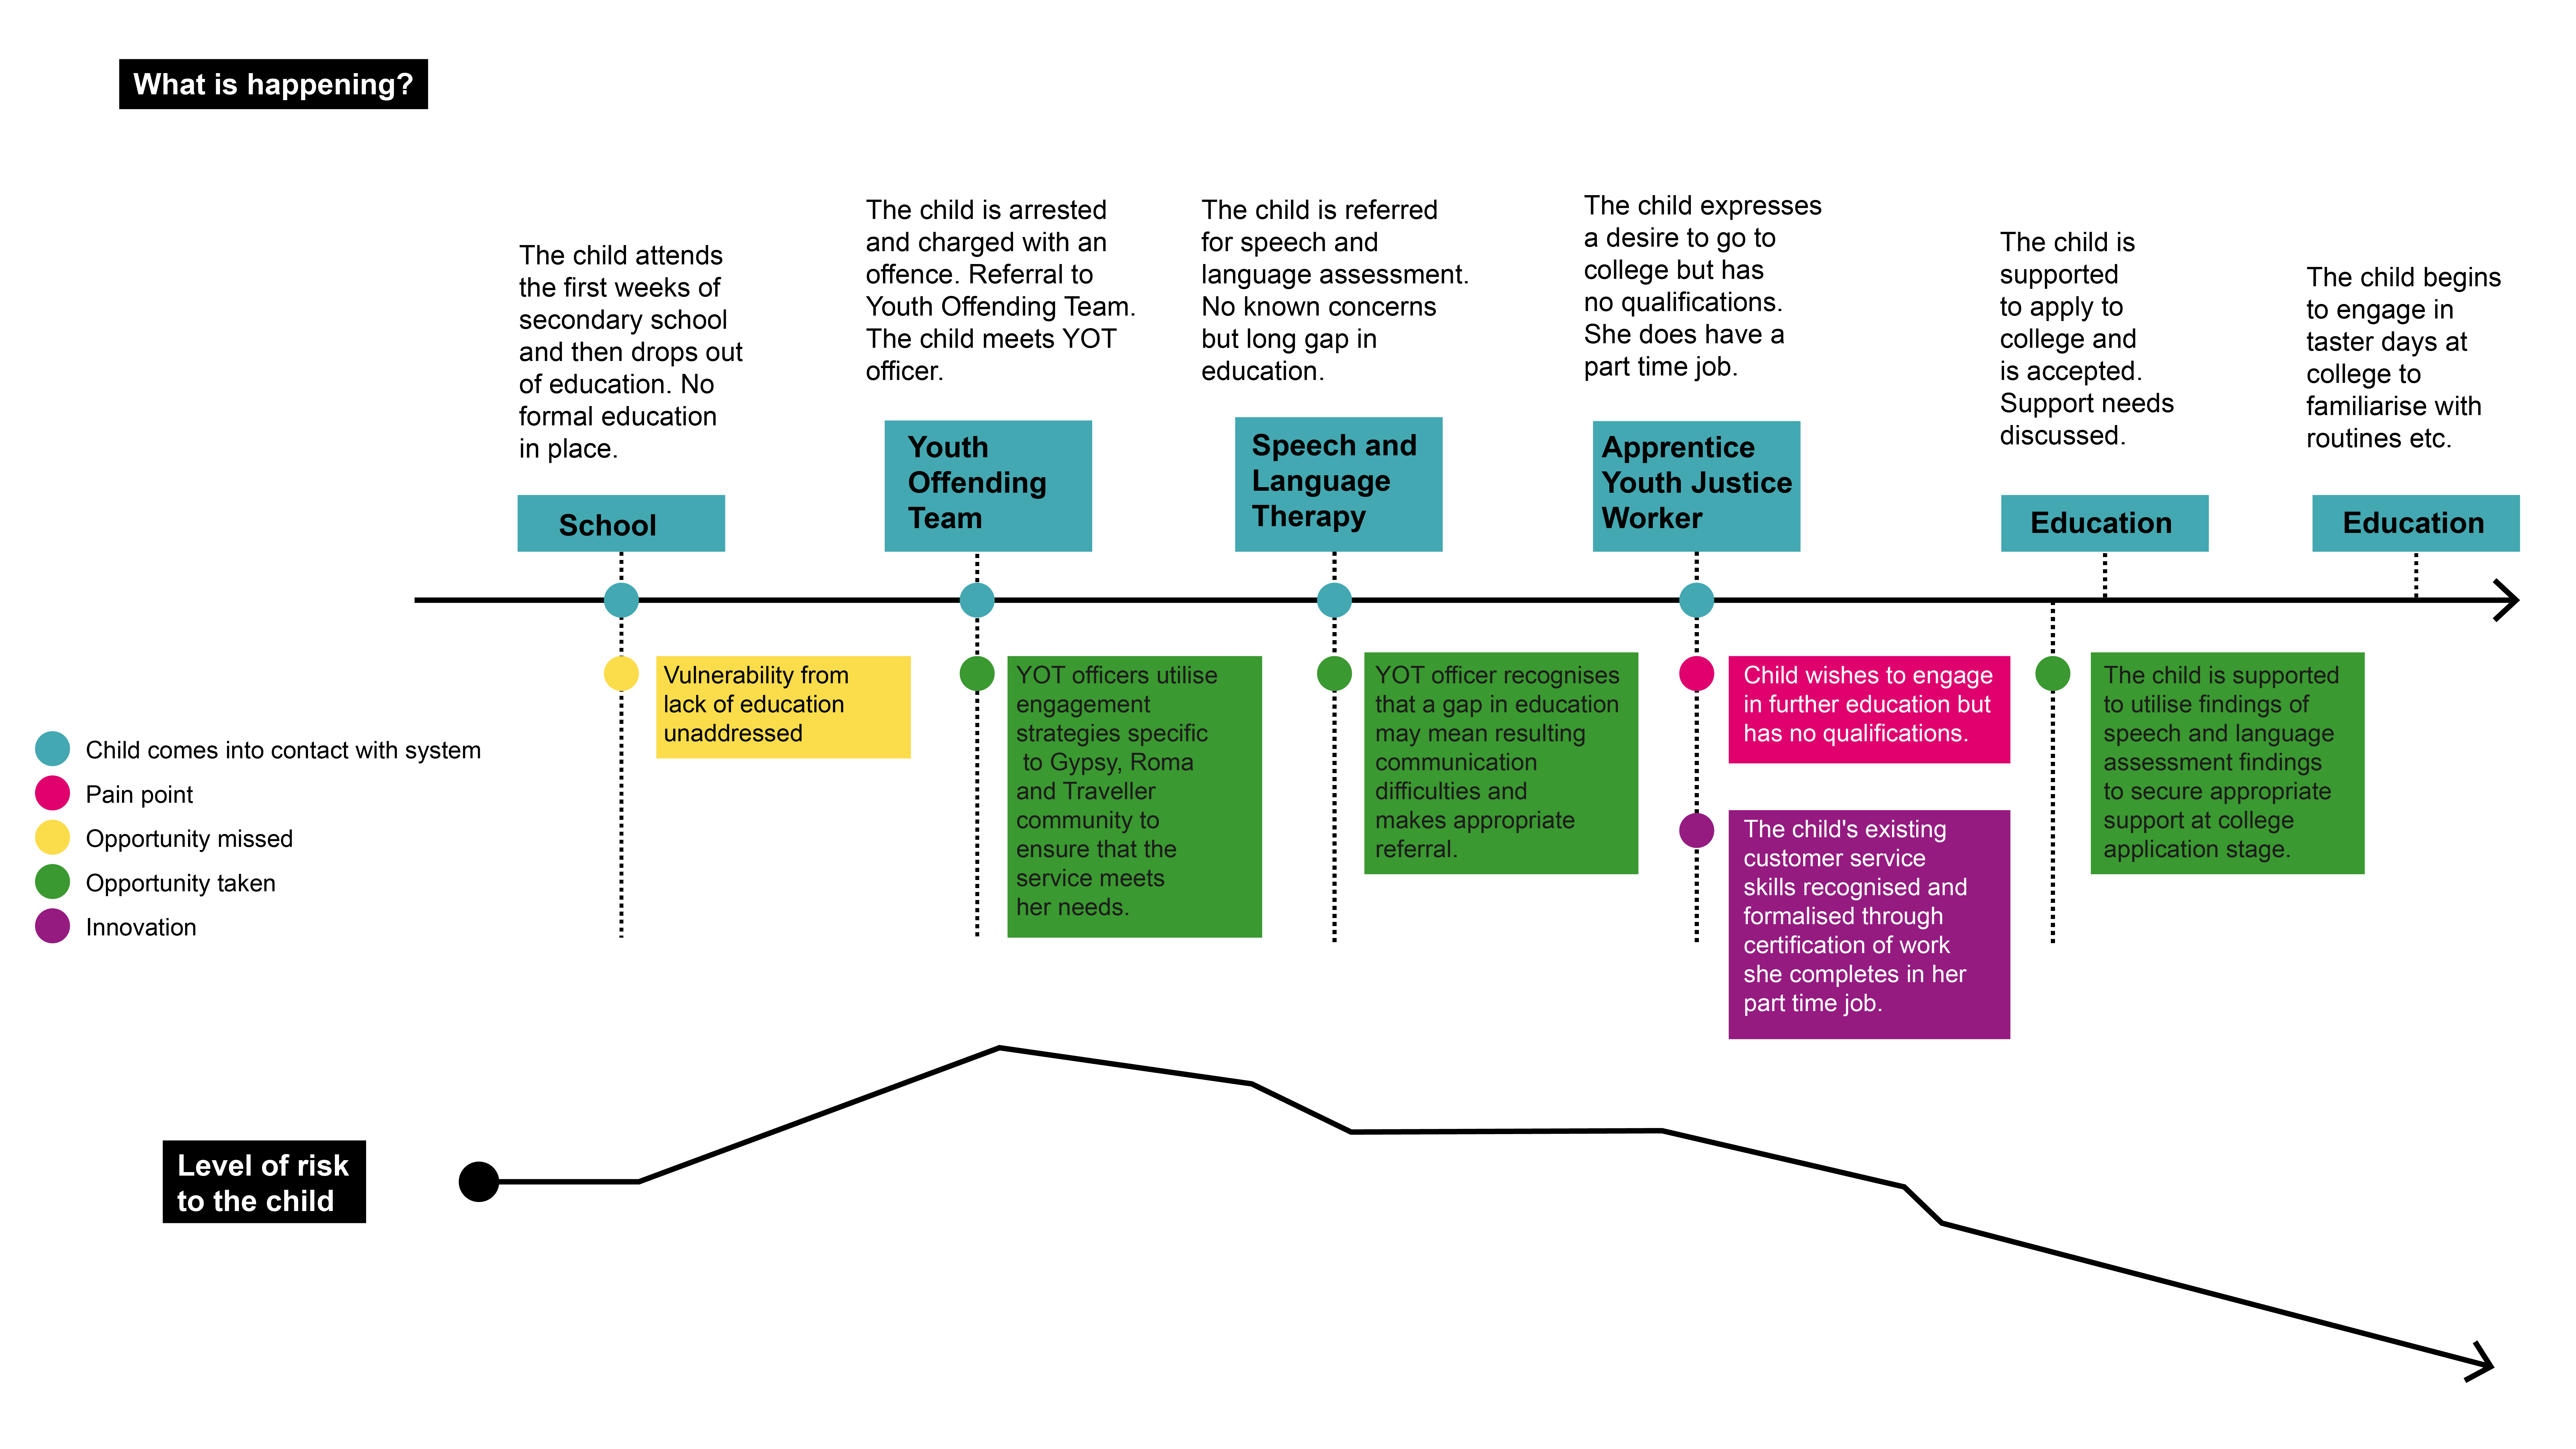 Diagram illustrating a hypothetical journey of a young person accessing services in West Berkshire. A full description can be found in the section Figure one: Image description.